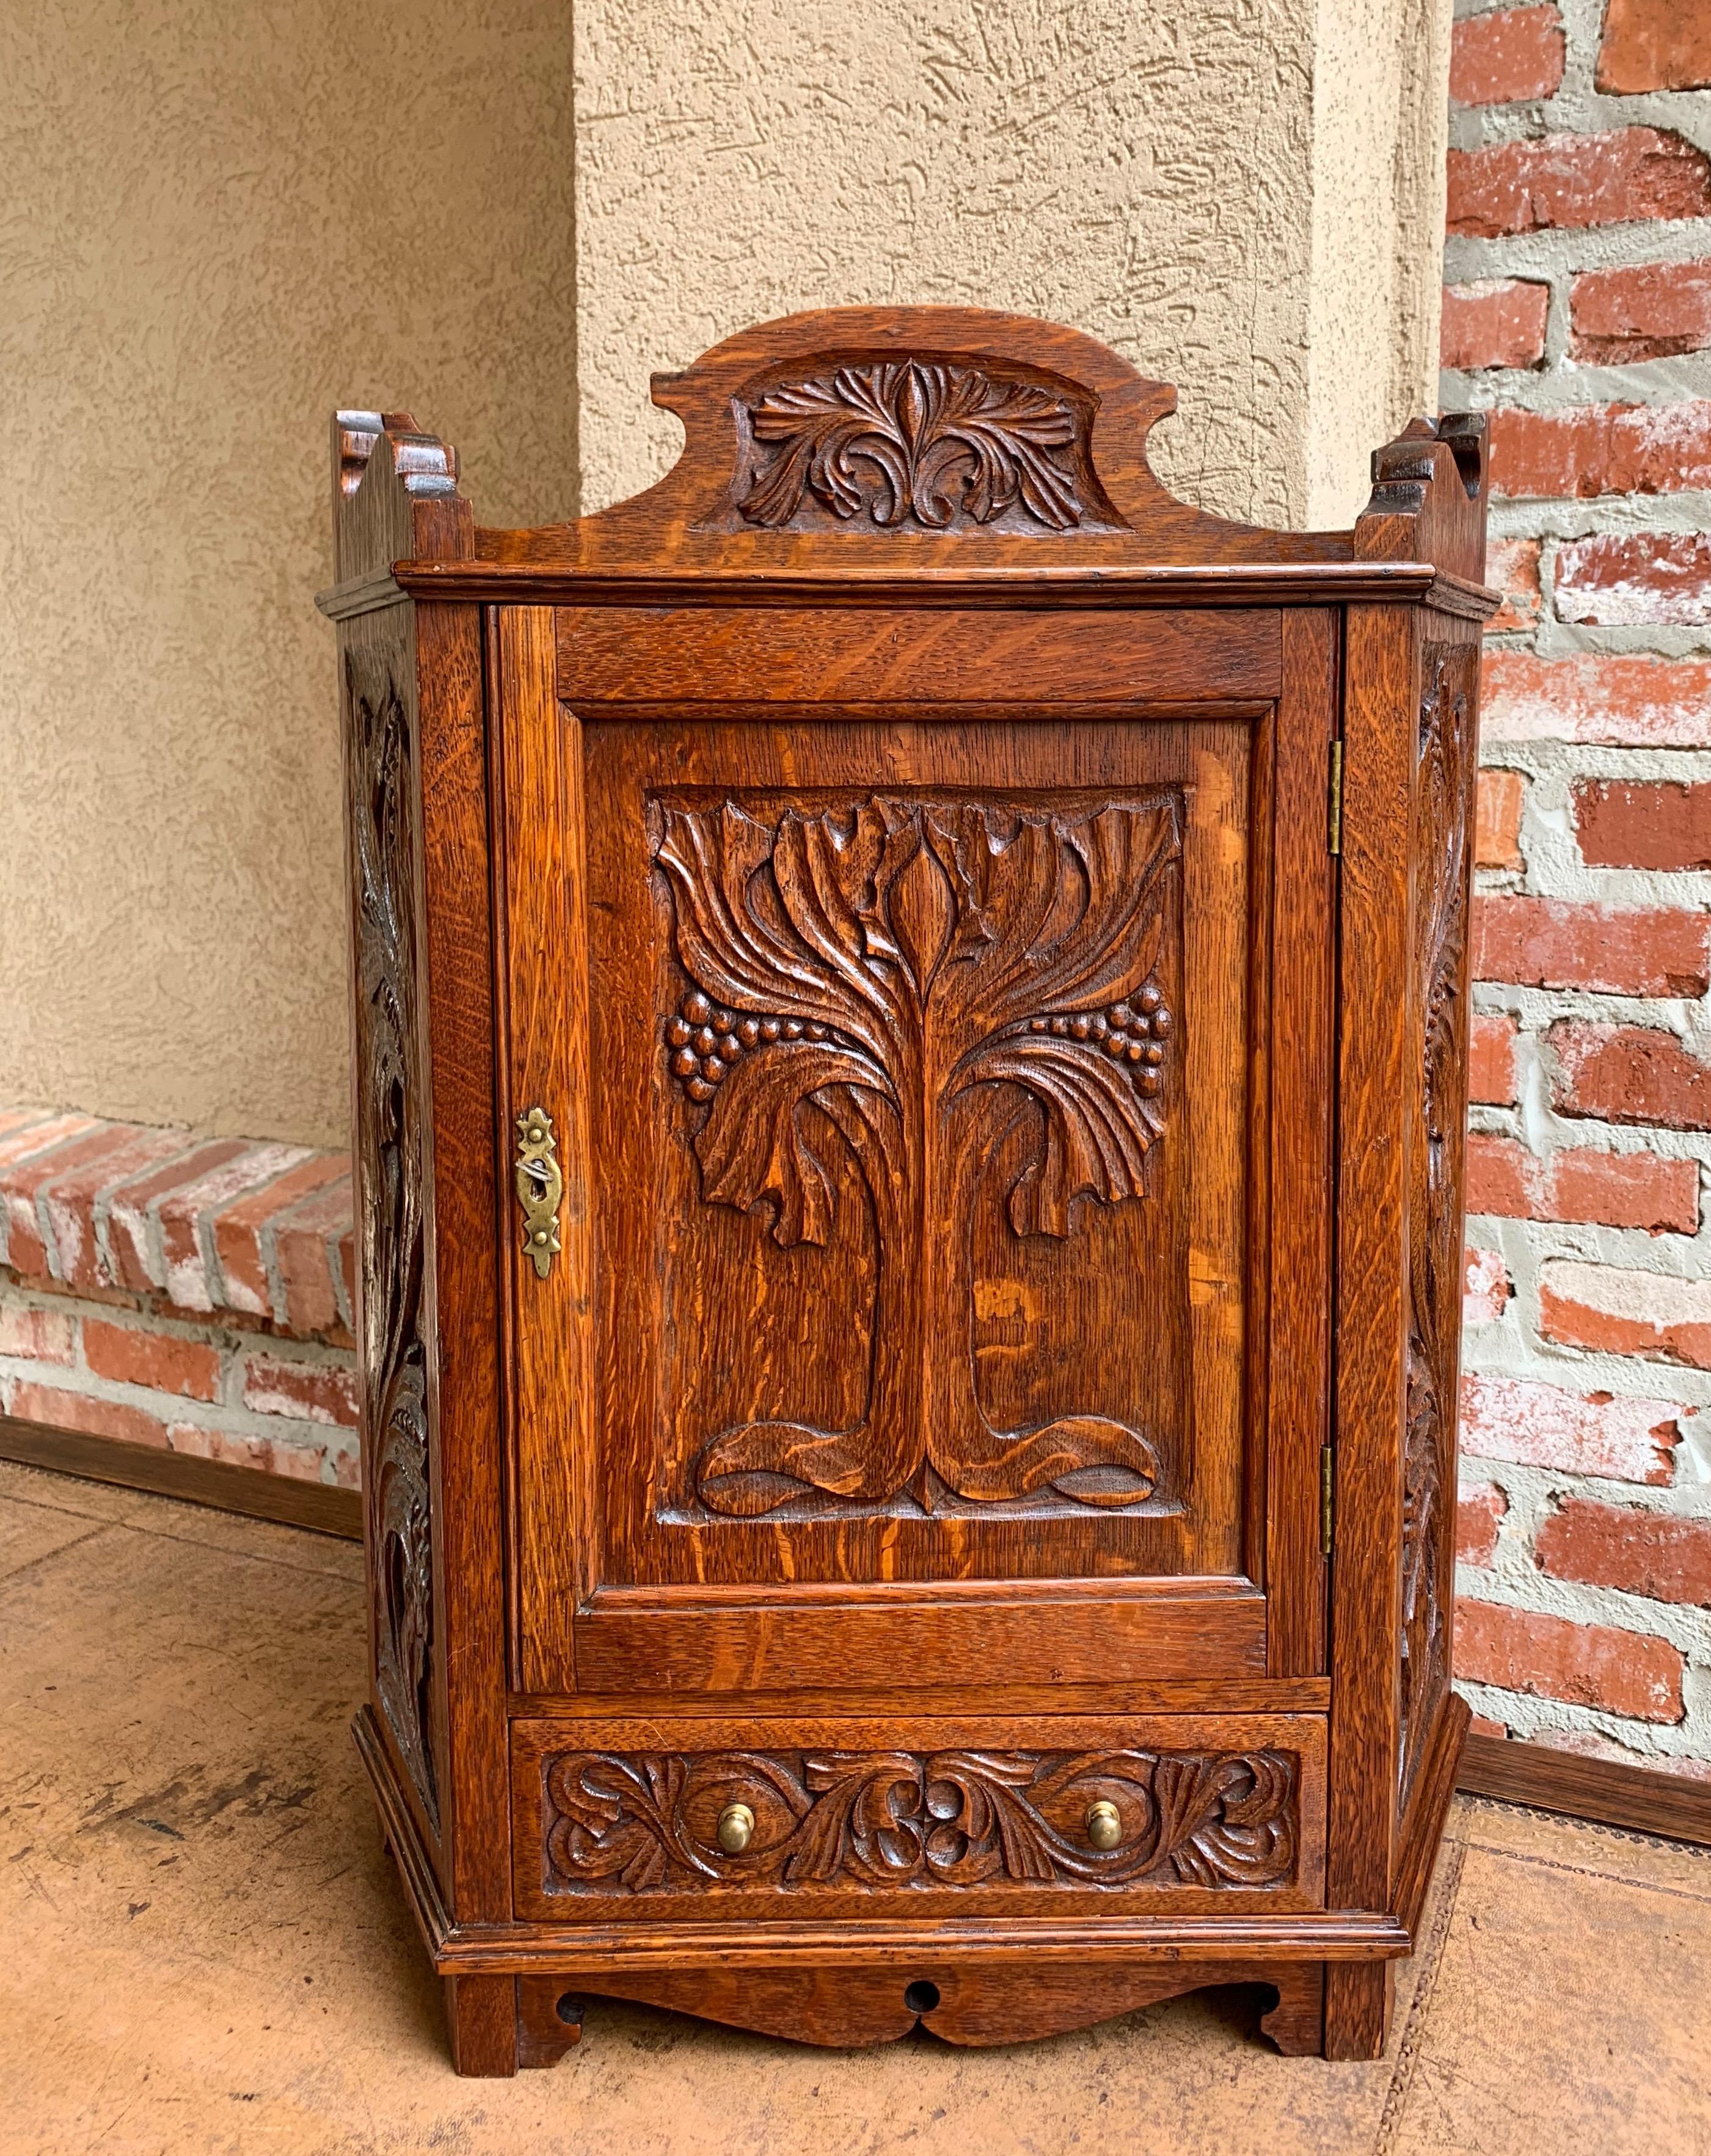 Direct from England, a lovely and versatile antique English carved oak cabinet, perfect to either hang on the wall or sit on a table/countertop~
~Heavily carved on all the panels, with scalloped edge, carved upper crown~
~Both sides have fully